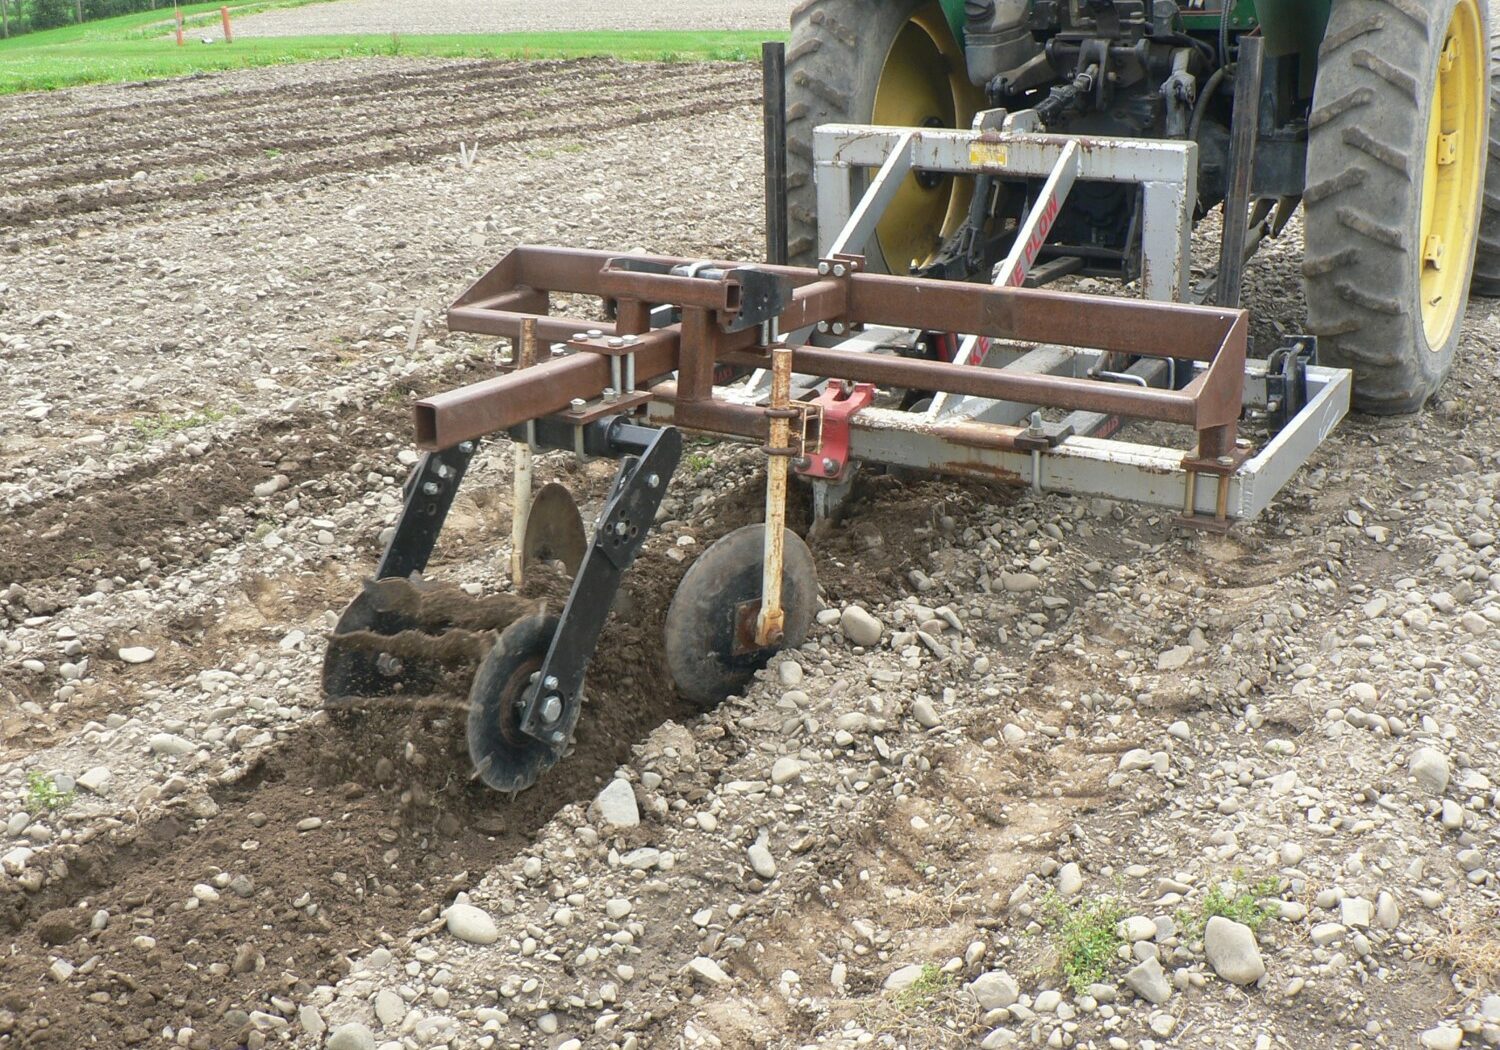 Yeomans Plow with a custom-built hilling discs and rolling basket attachments preparing the planting zone. 